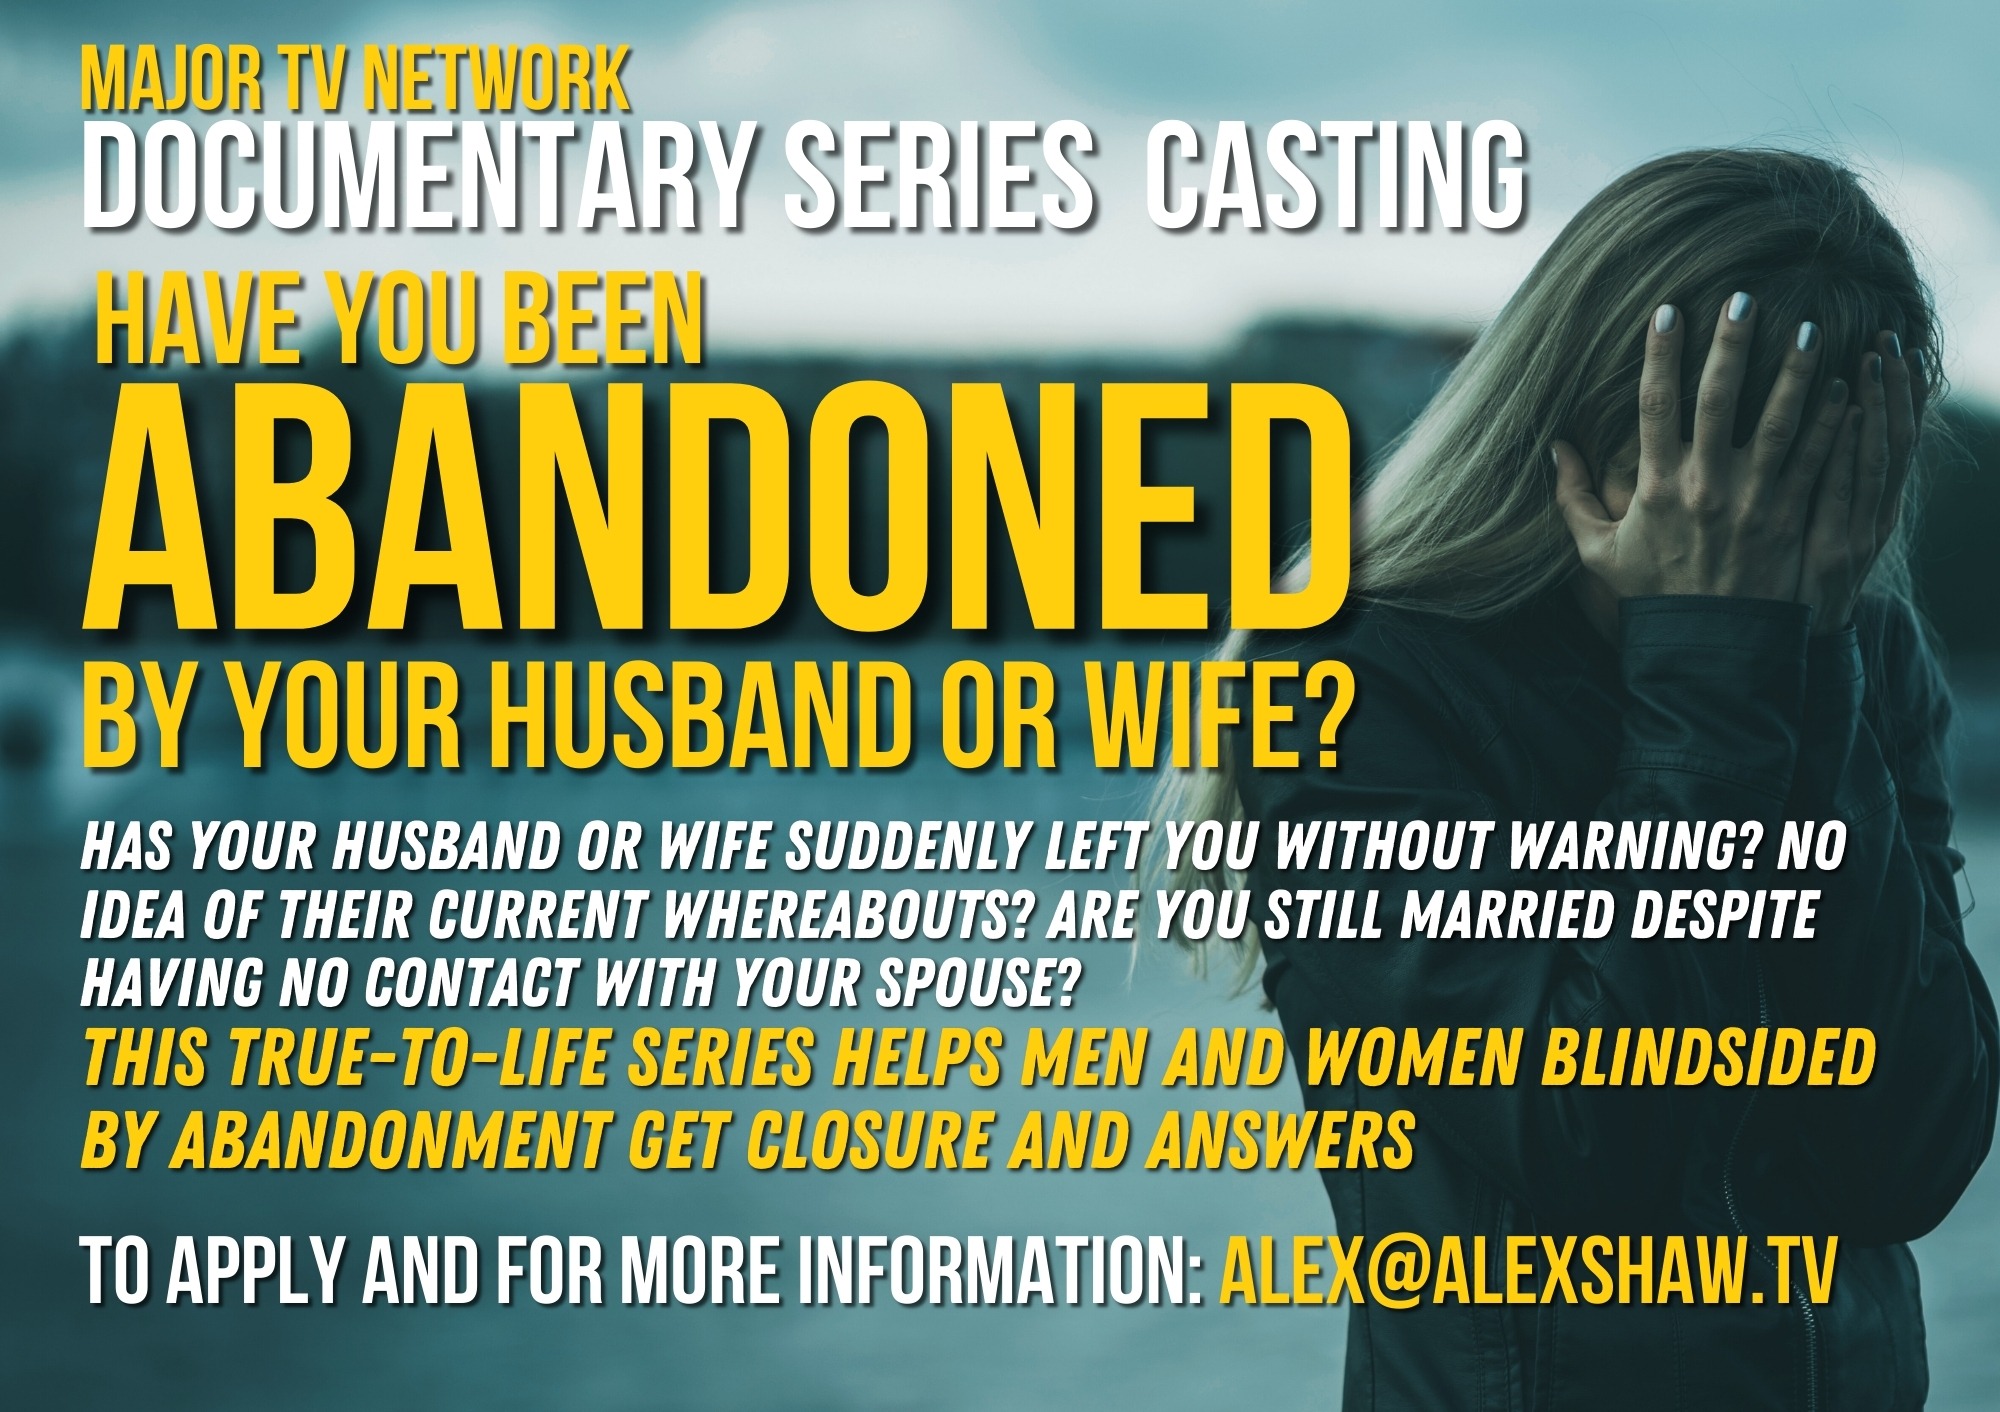 Abandoned: By your Husband or Wife?